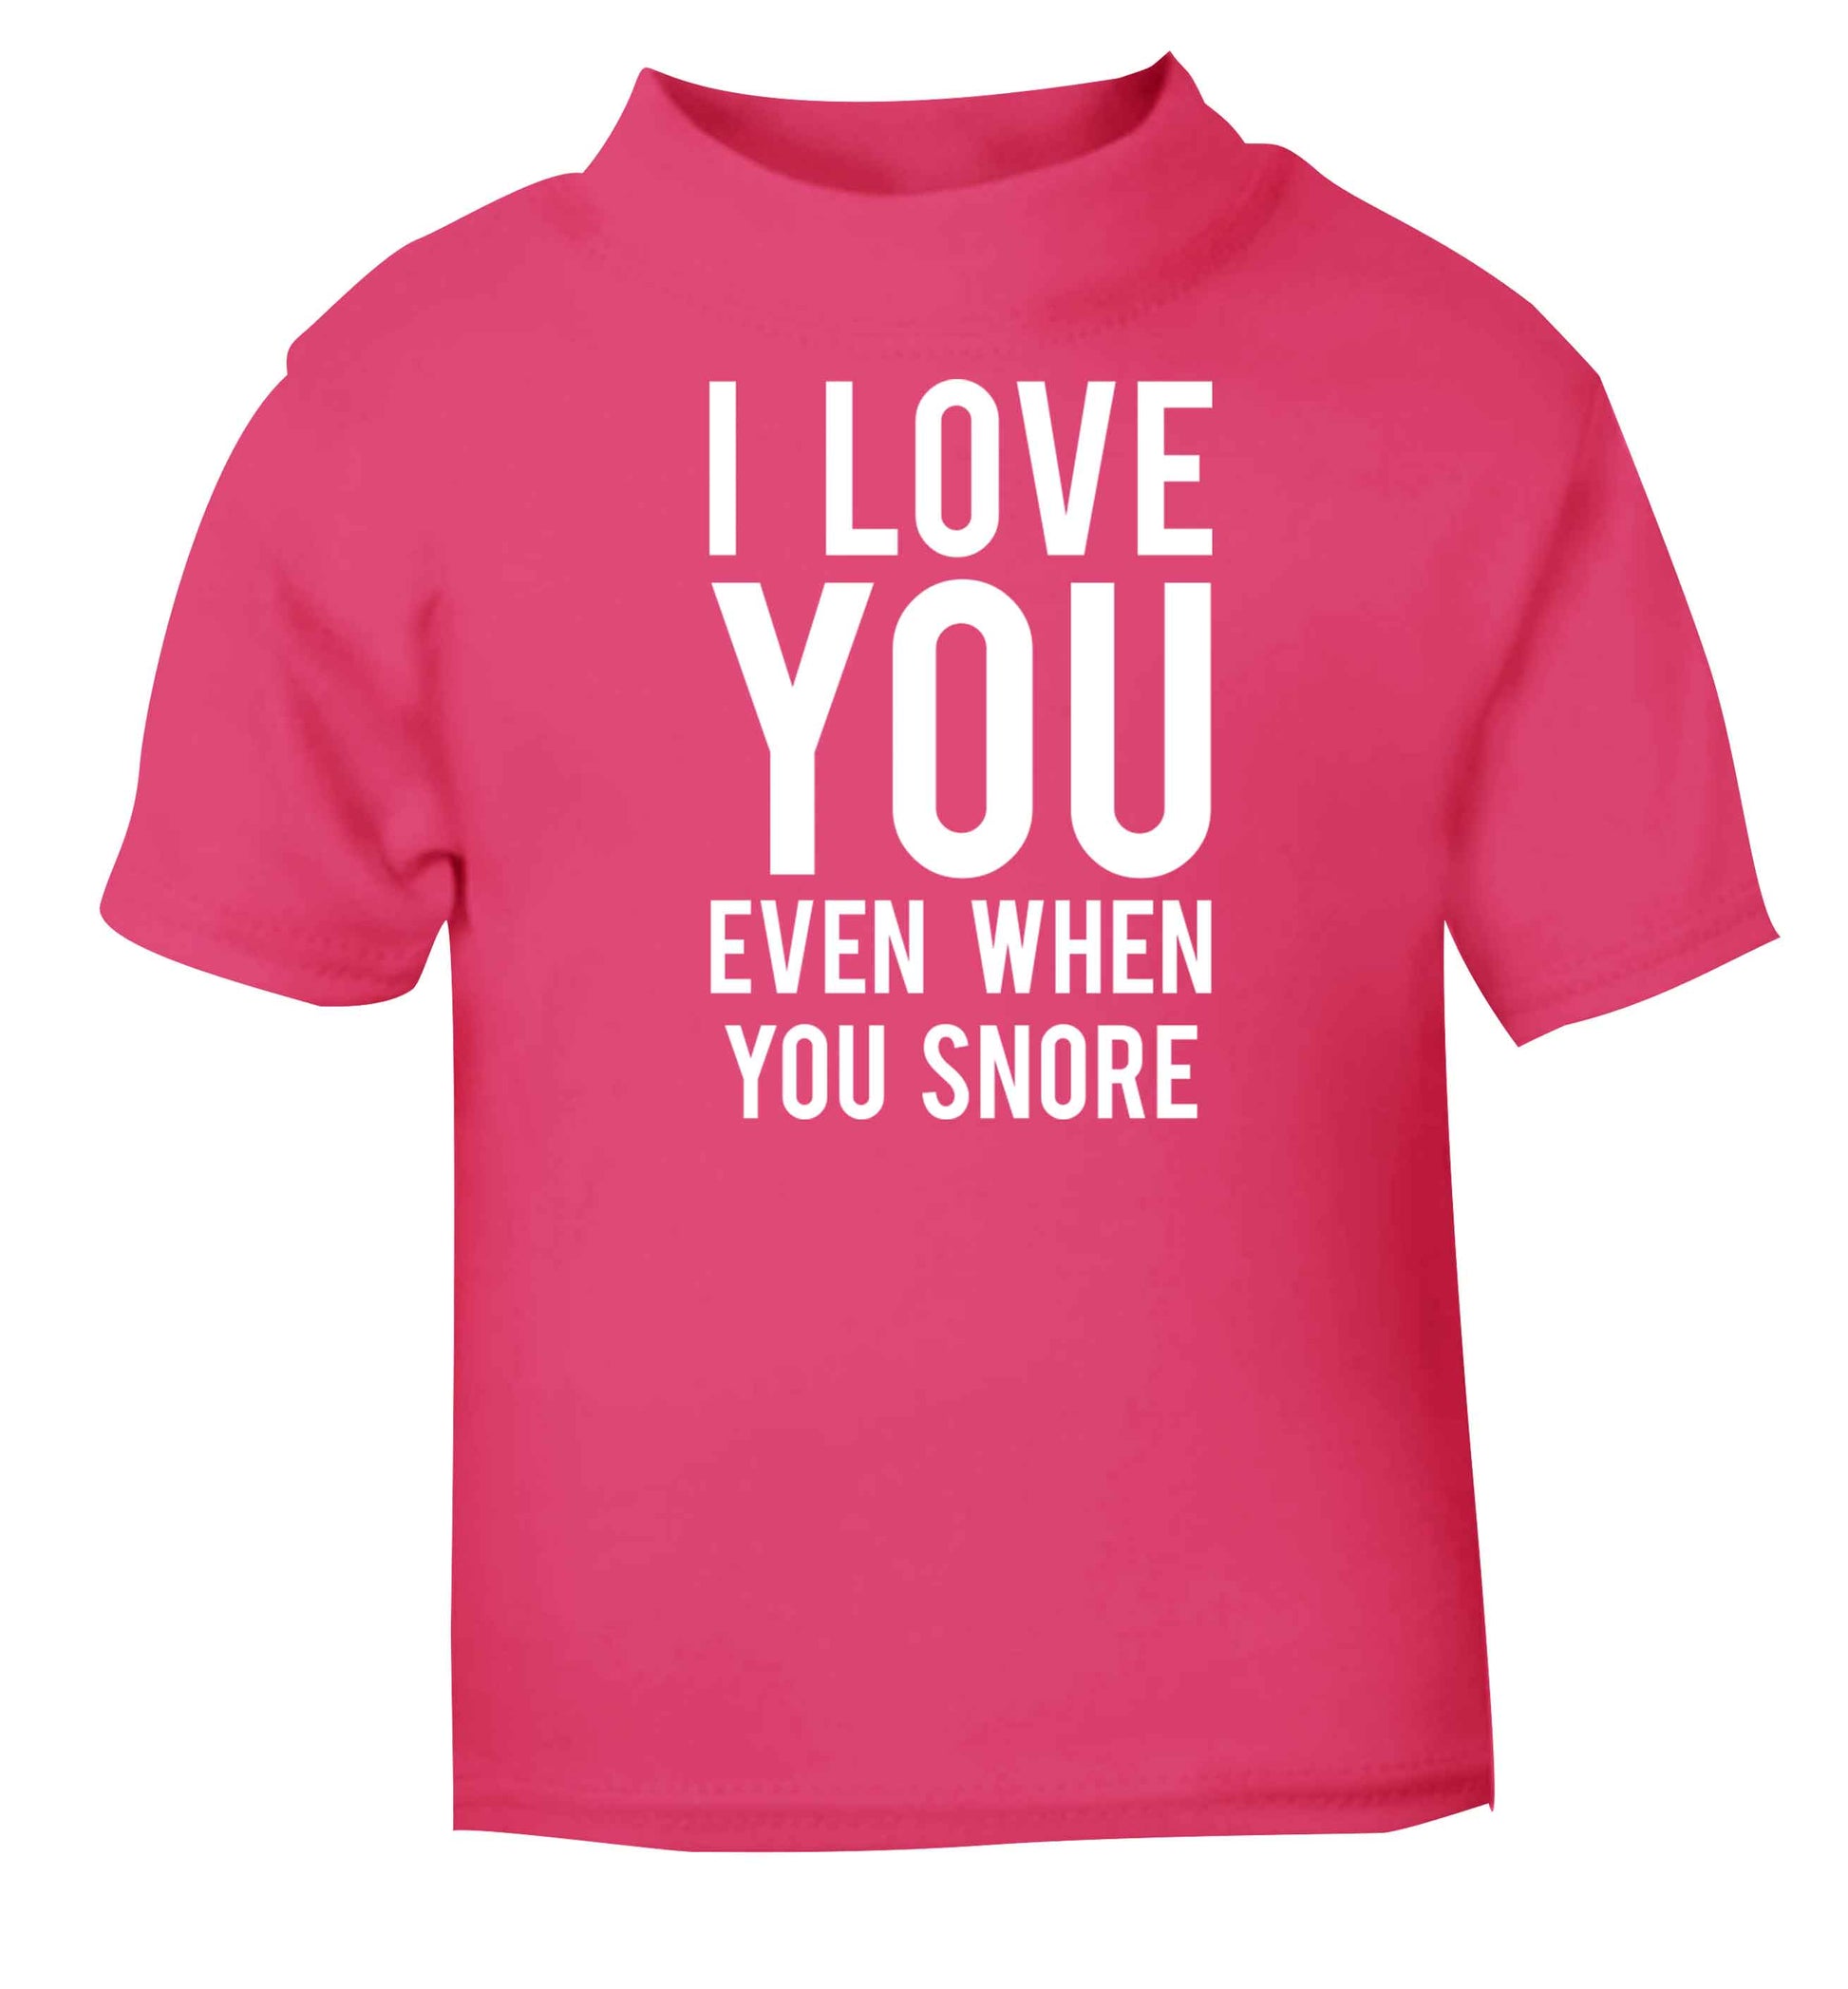 I love you even when you snore pink baby toddler Tshirt 2 Years